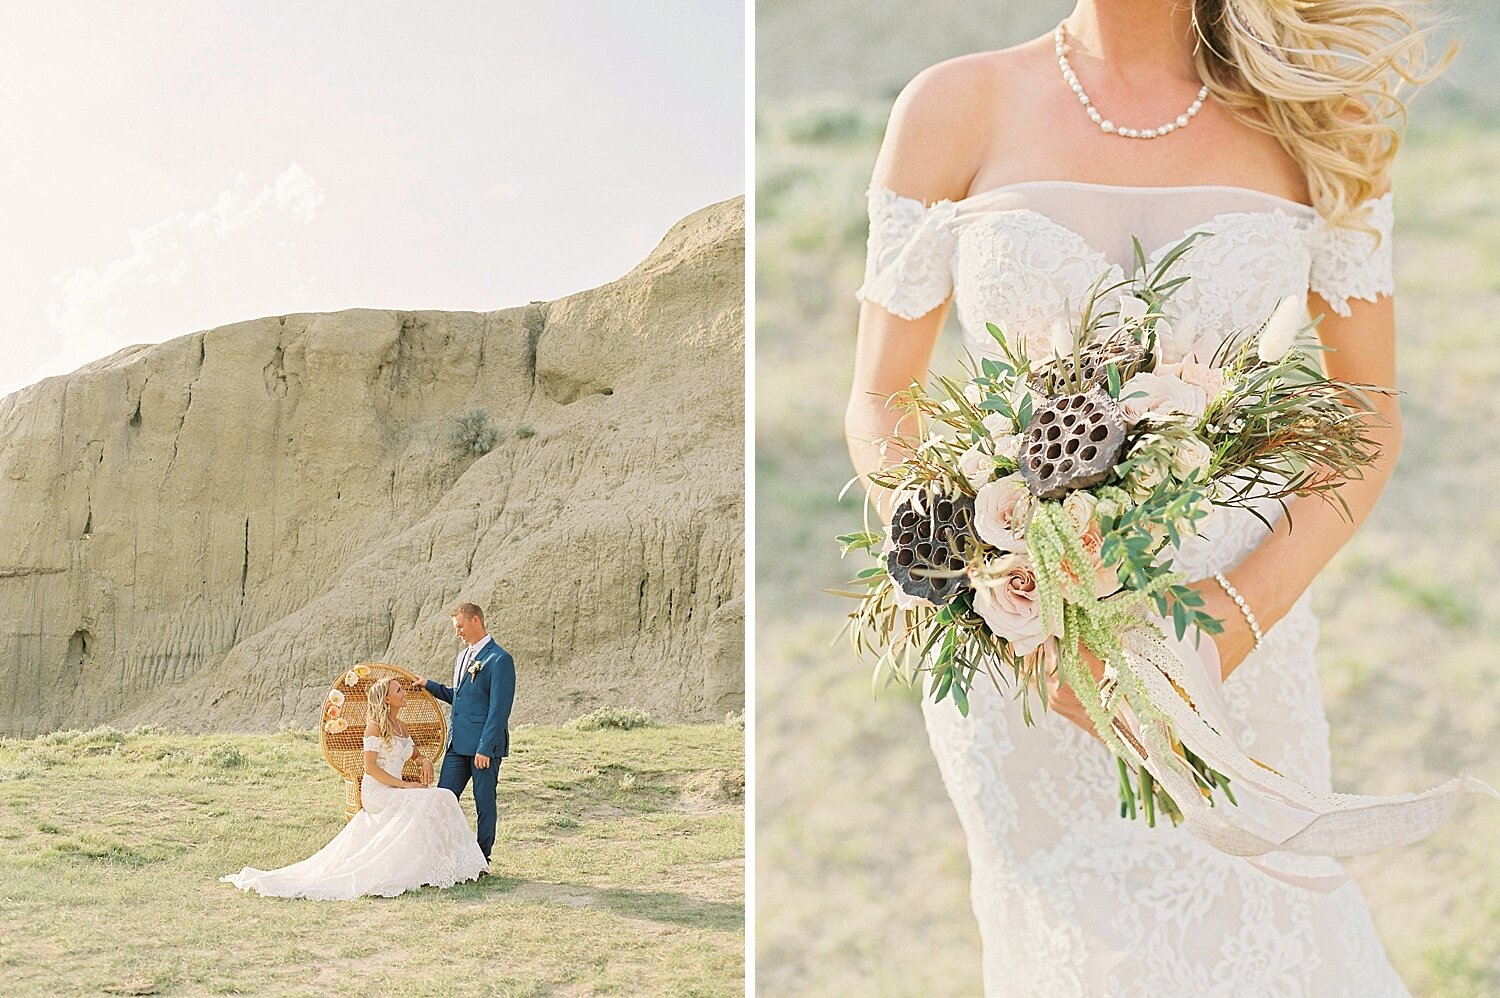   From the photographer:  “Our local florist put together the beautiful bouquet and boutonniere with lots of textures to compliment the location. Wrapping the boutonniere in leather adding to the natural, raw element. Wanting to include something ext